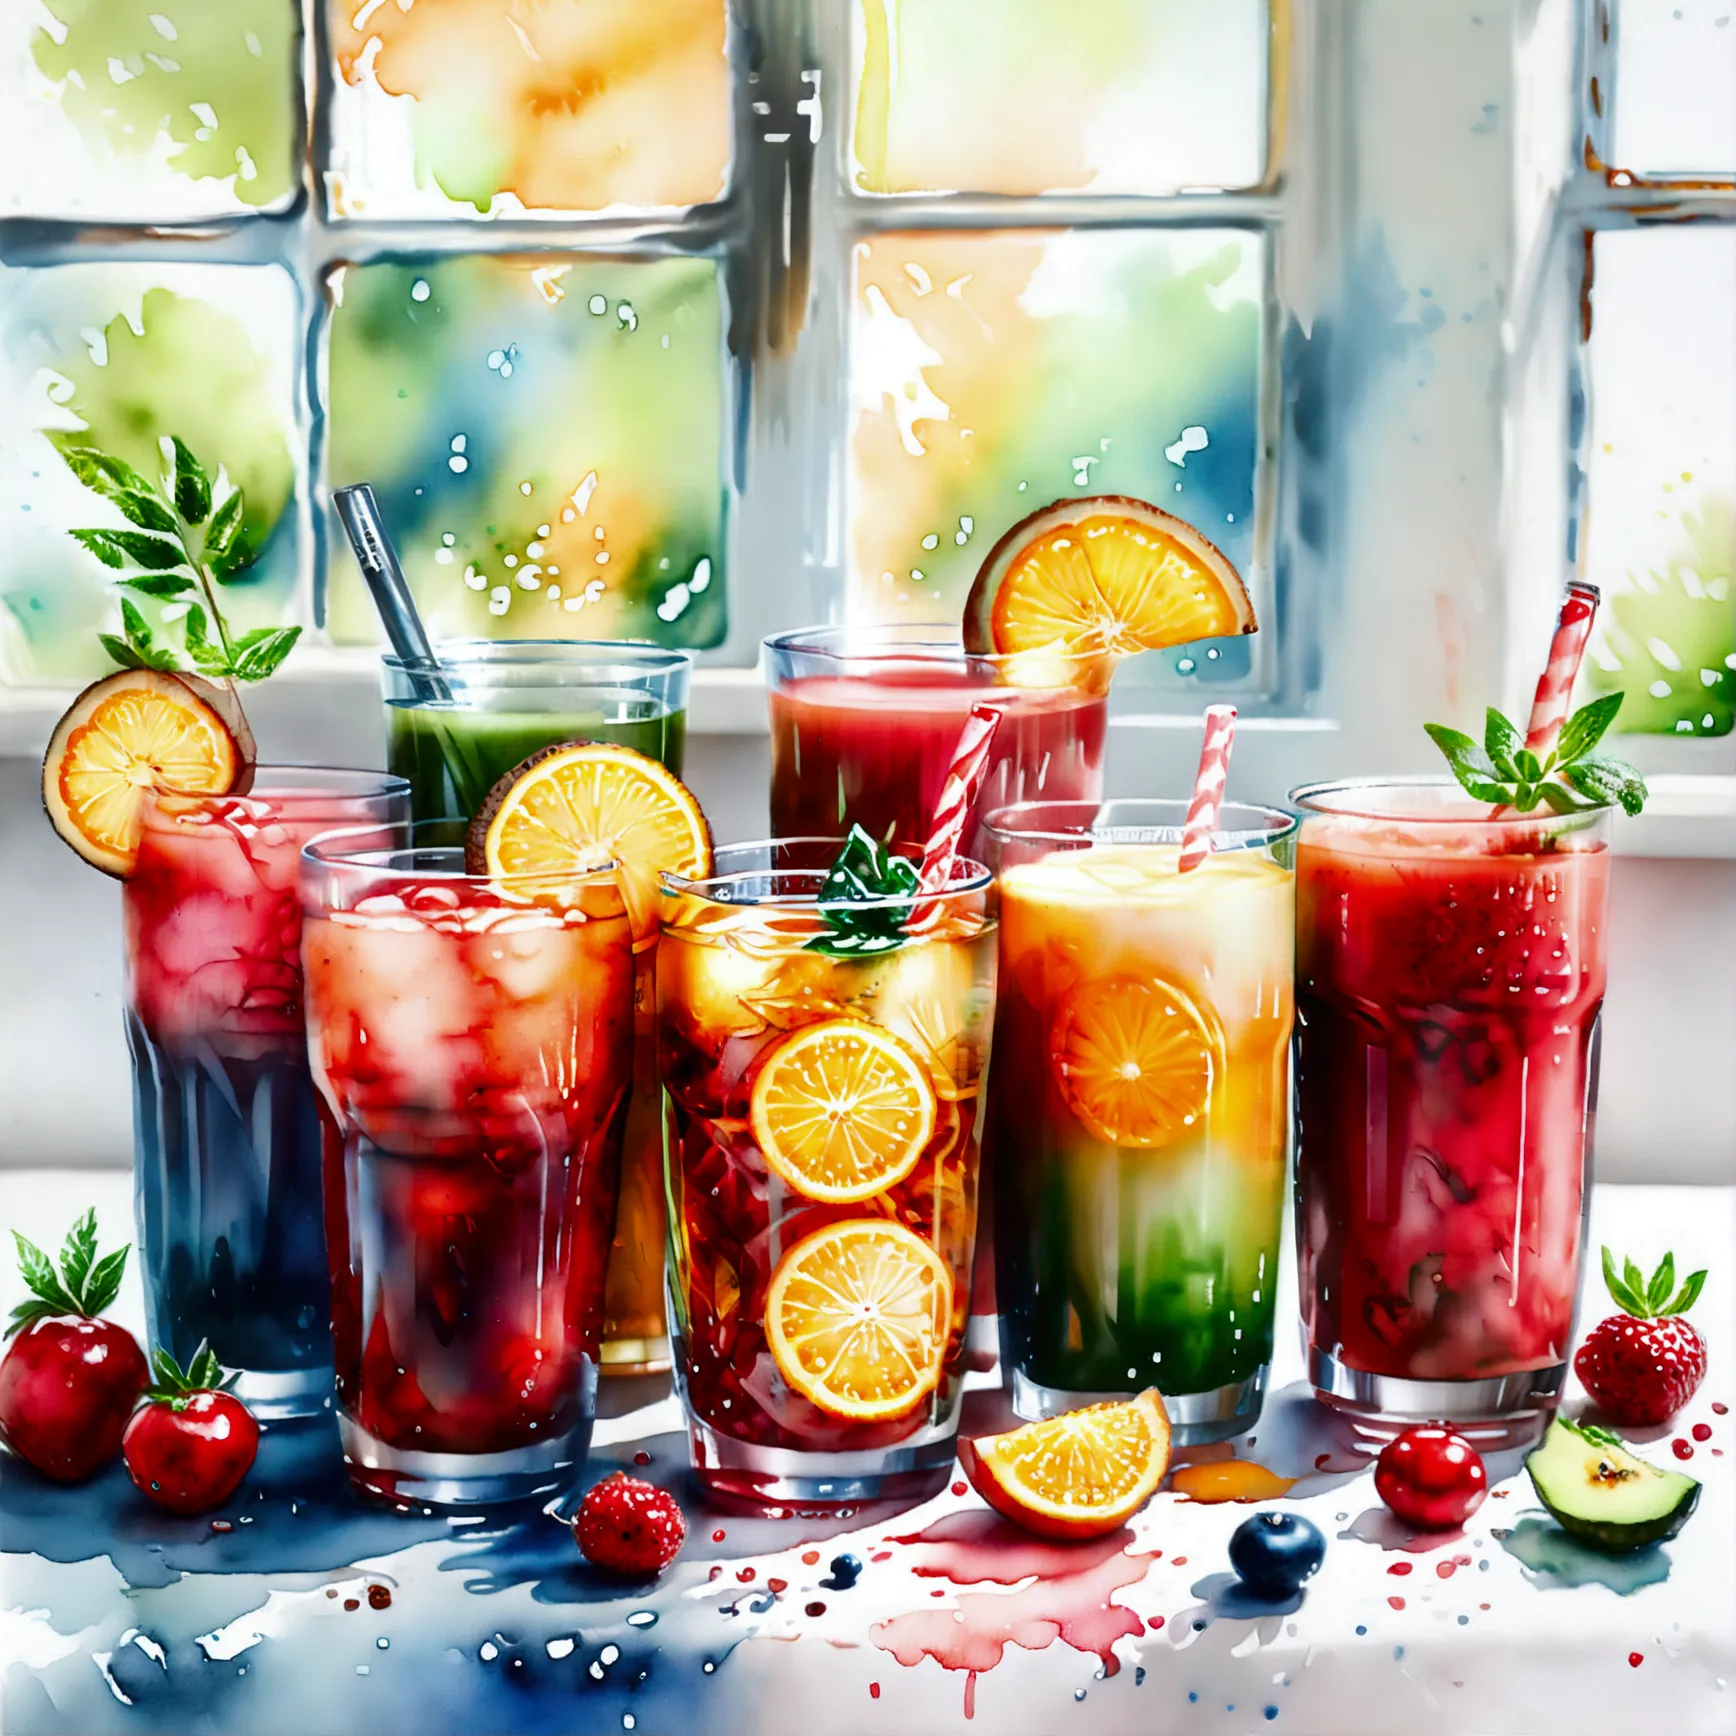 there are many types of colorful healthy drinks served in glasses, the glasses sitting on a surface, juices, smoothie, illustrat...